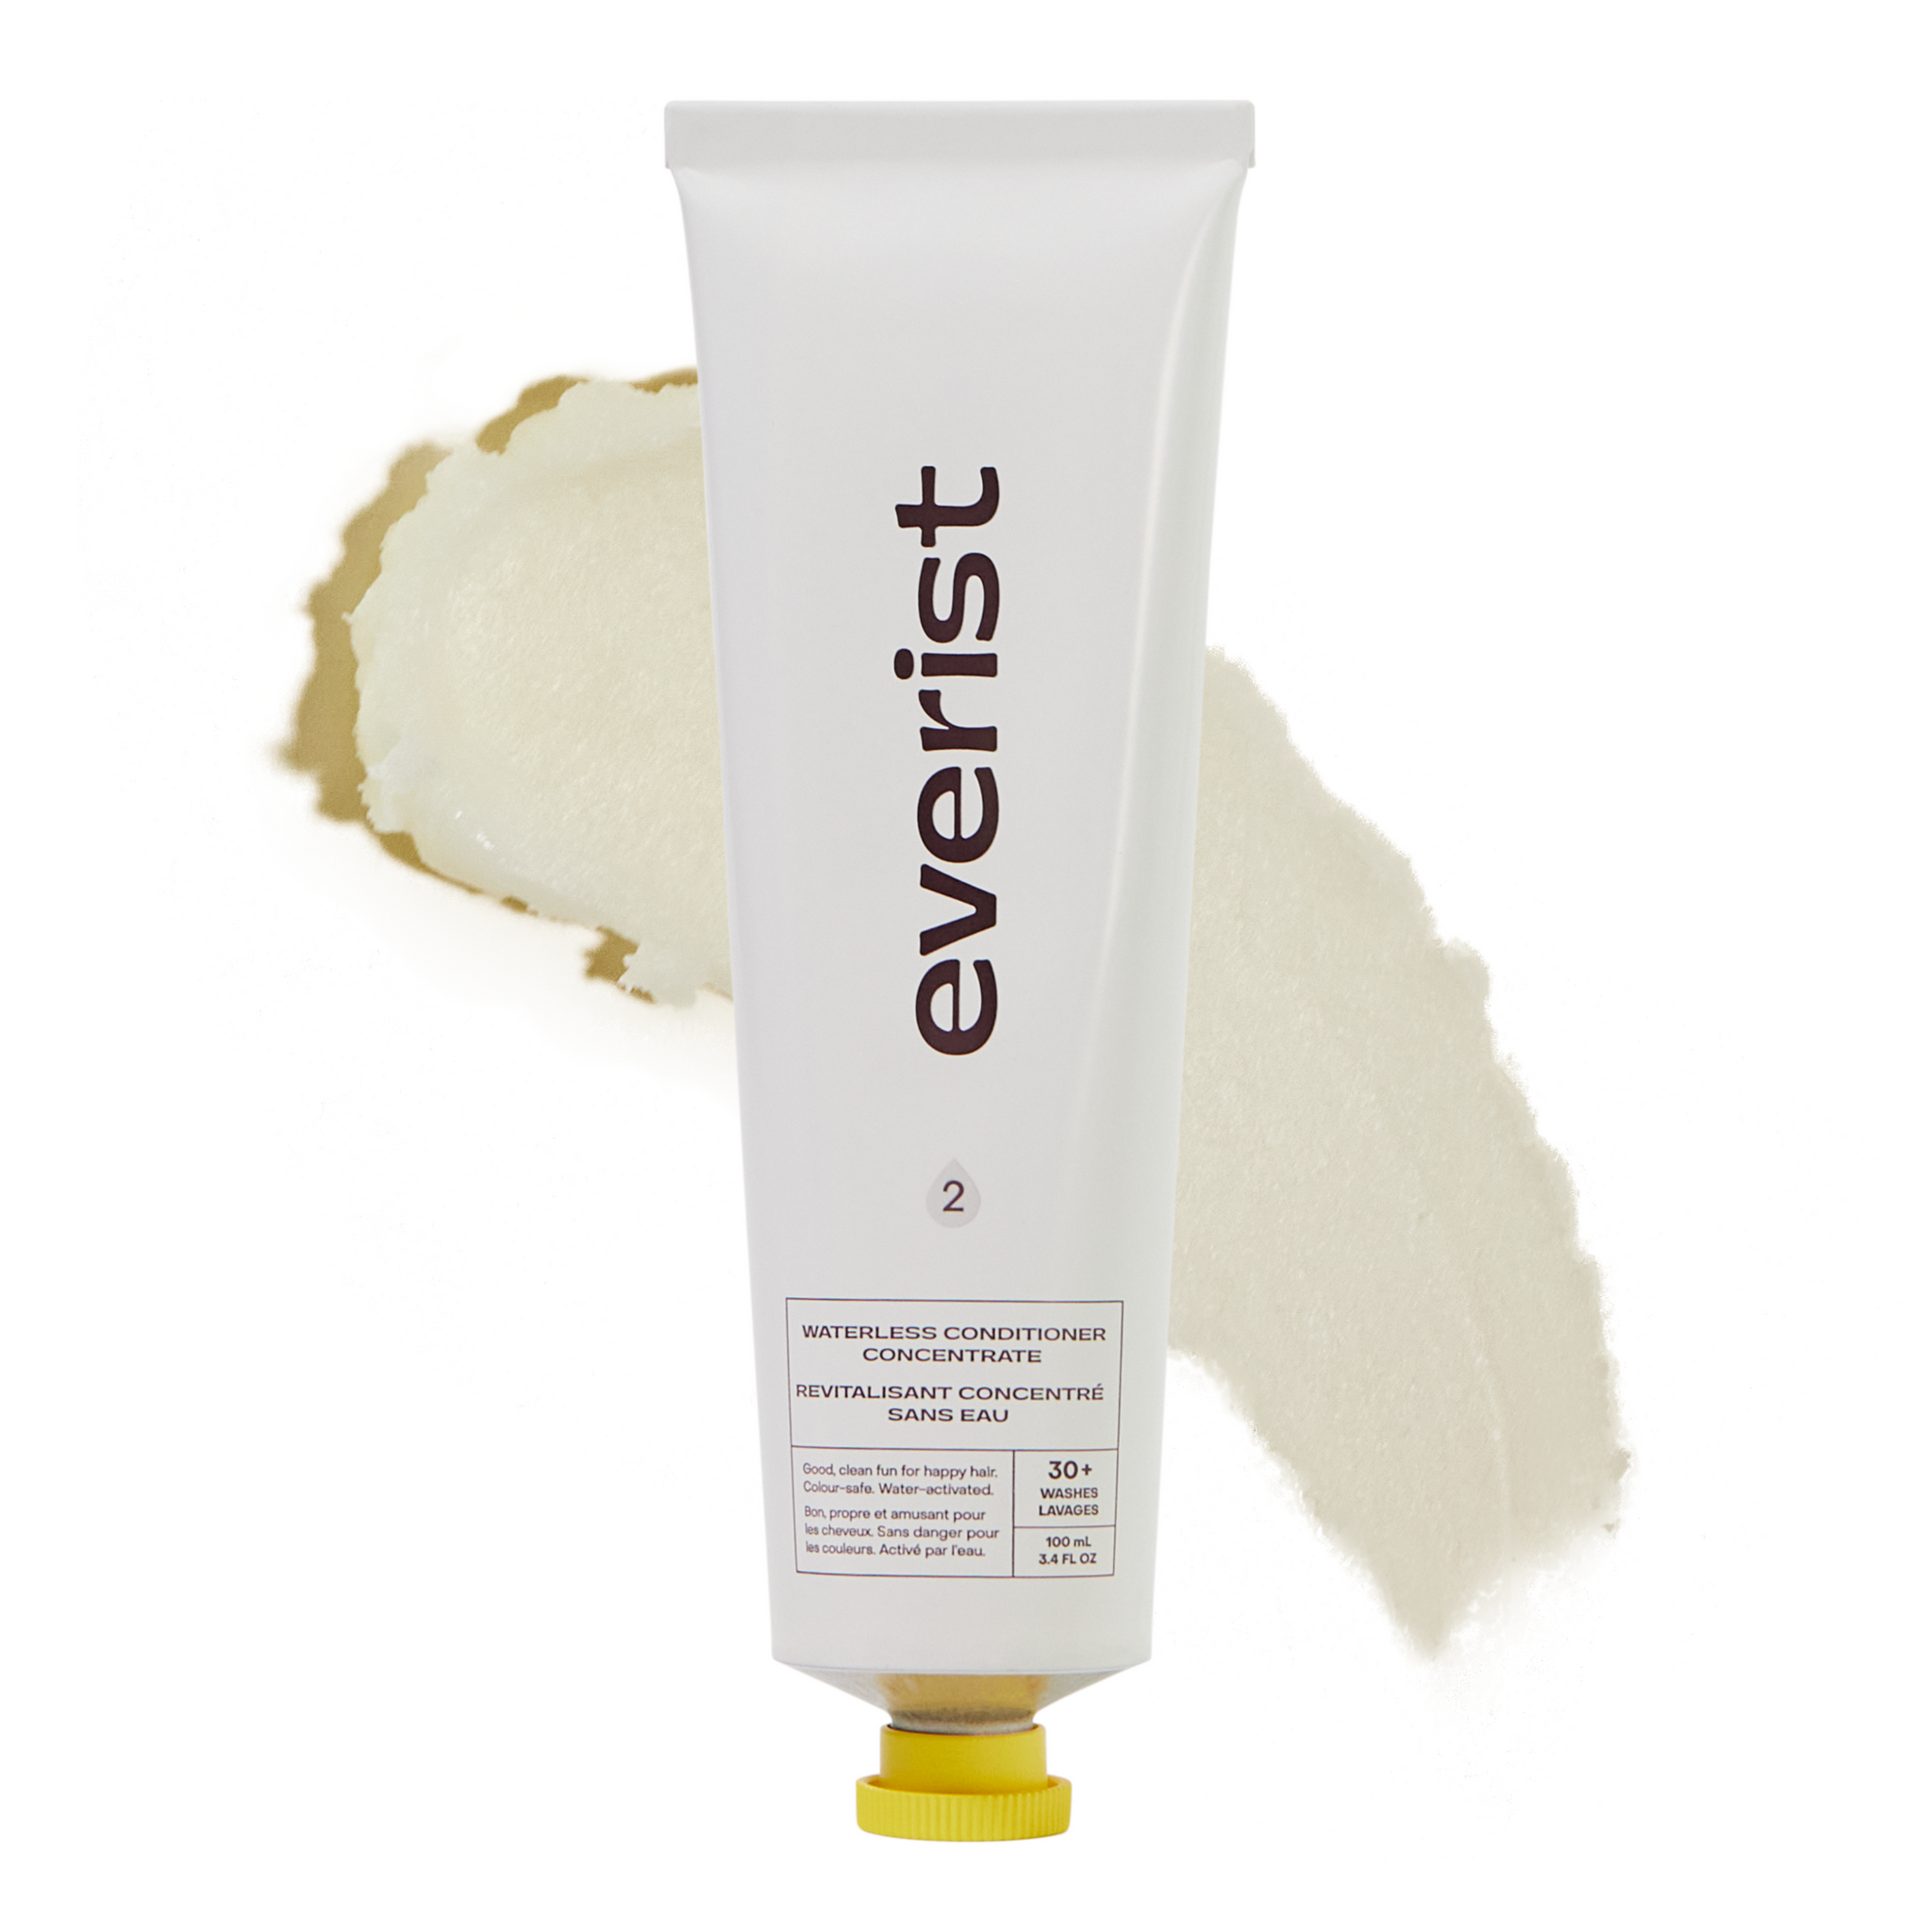 Everist Waterless Conditioner Concentrate with Swatch